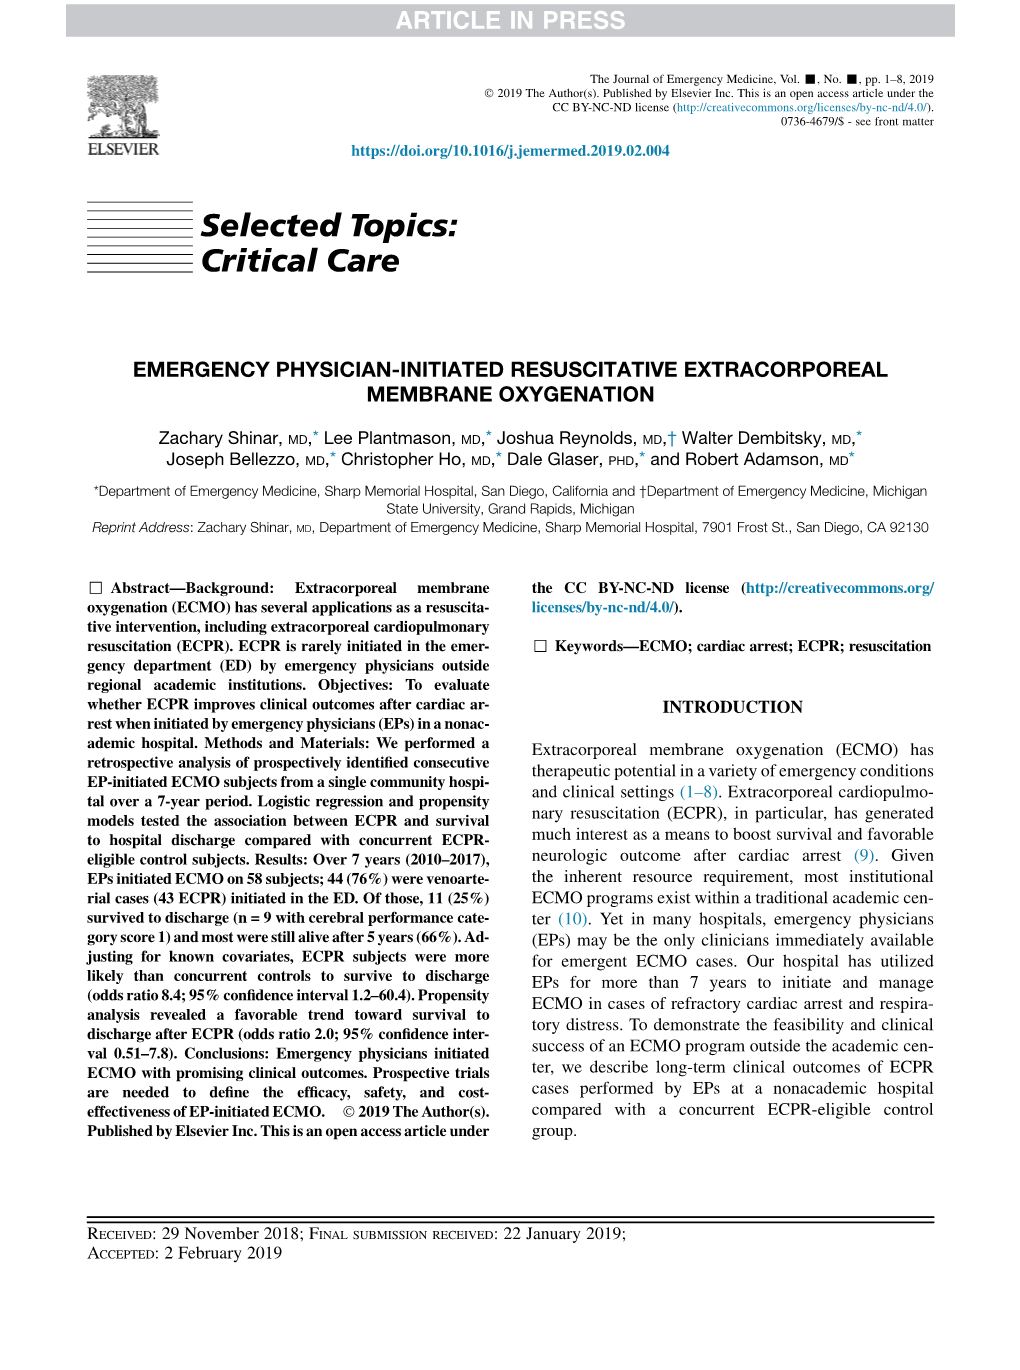 Emergency Physician-Initiated Resuscitative Extracorporeal Membrane Oxygenation